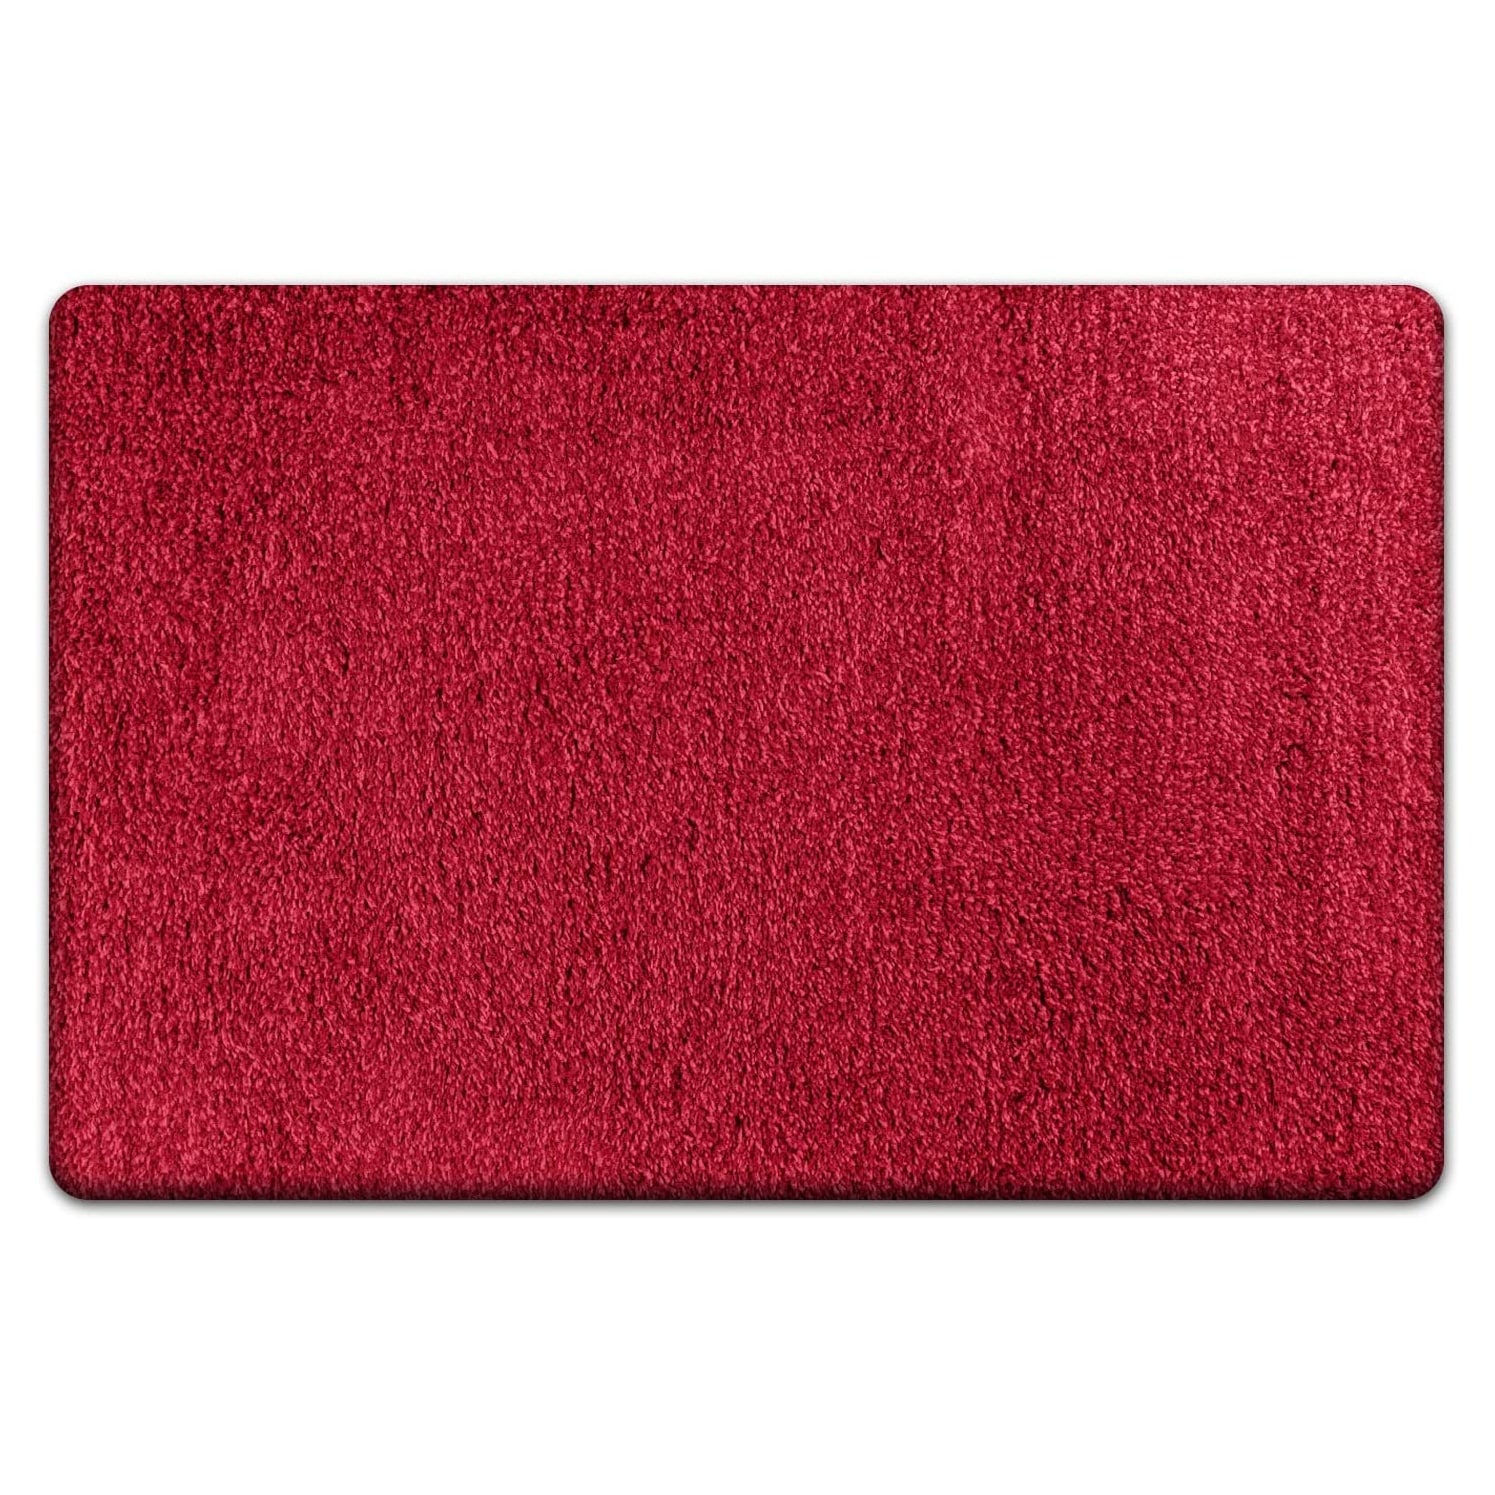 https://ak1.ostkcdn.com/images/products/is/images/direct/3c42733294906639506ce47fe209e7a116f19174/Door-Mat%2C-Entry-Rug%2C-Super-Absorbent%2C-20-X-30.jpg